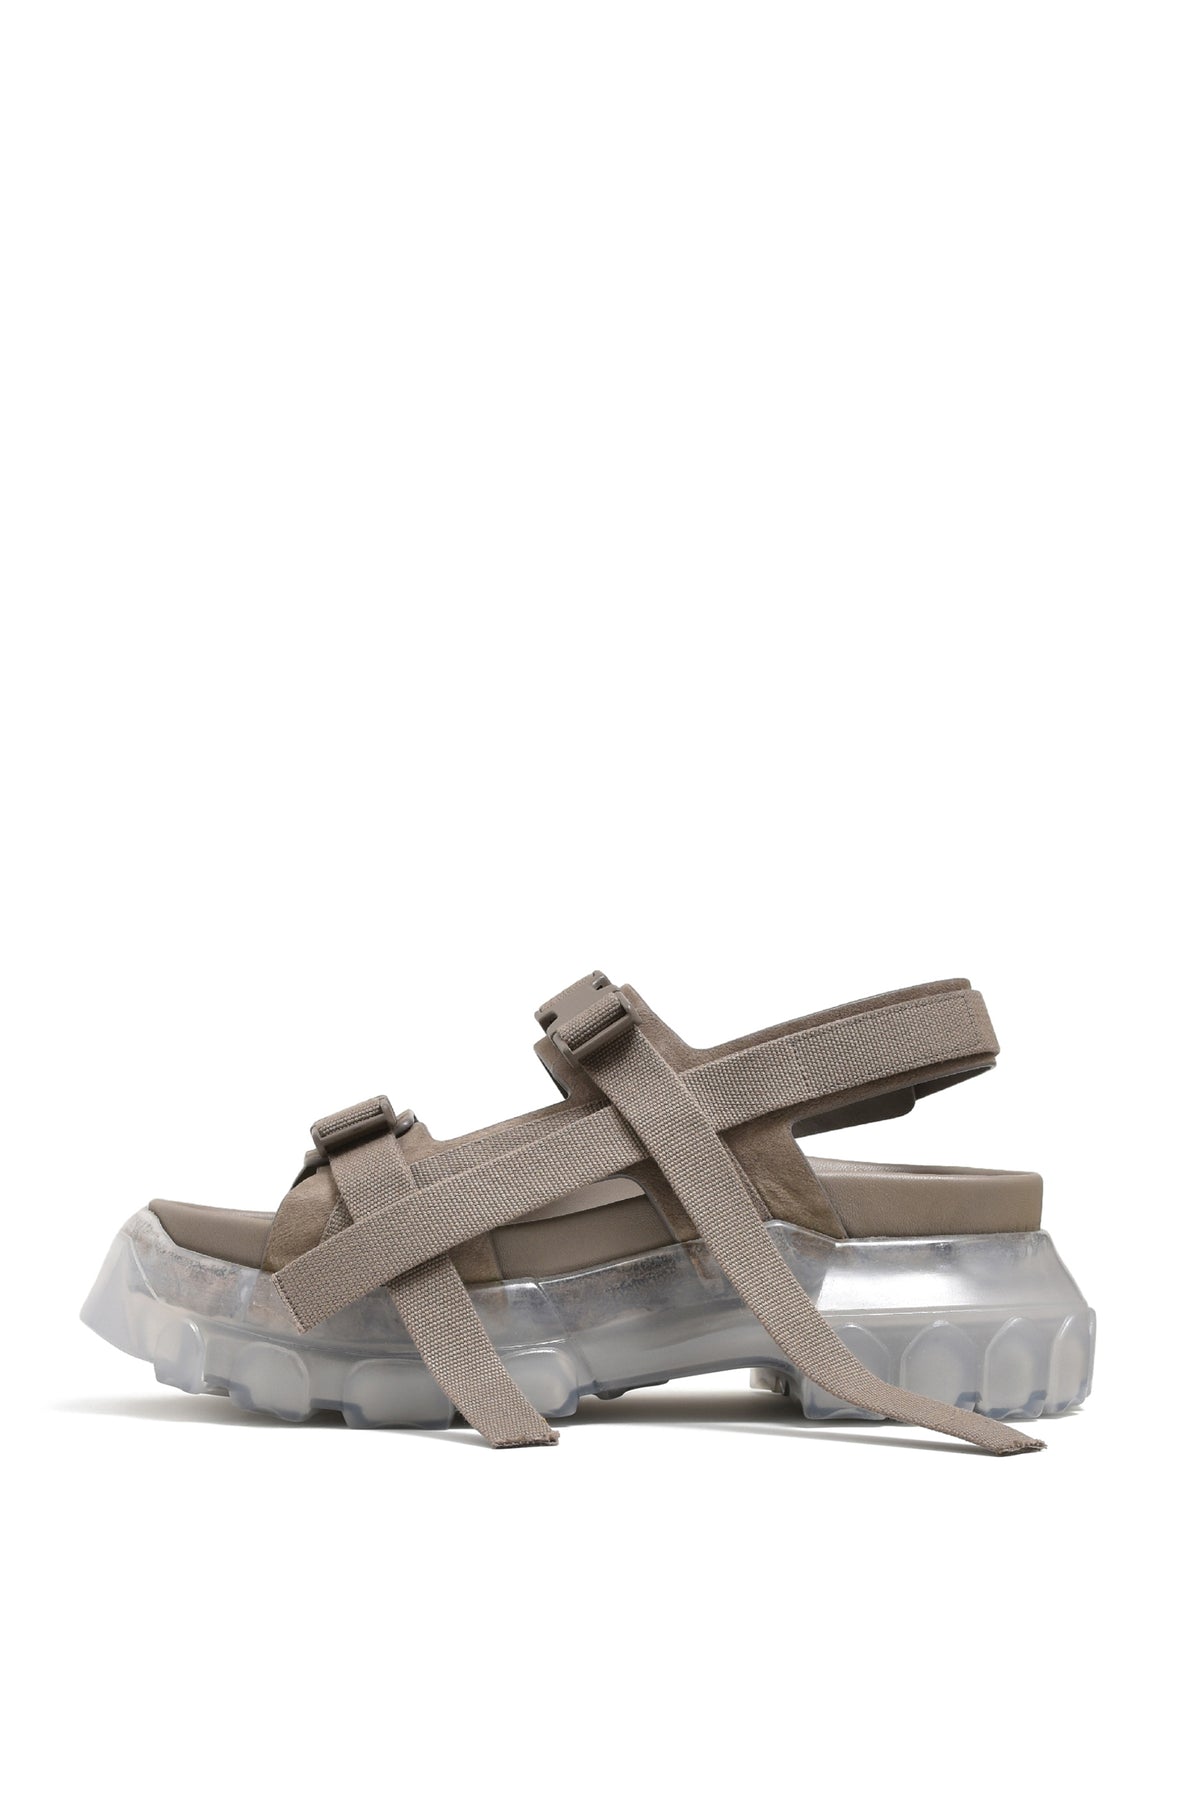 TRACTOR SANDAL / DUST CLEAR